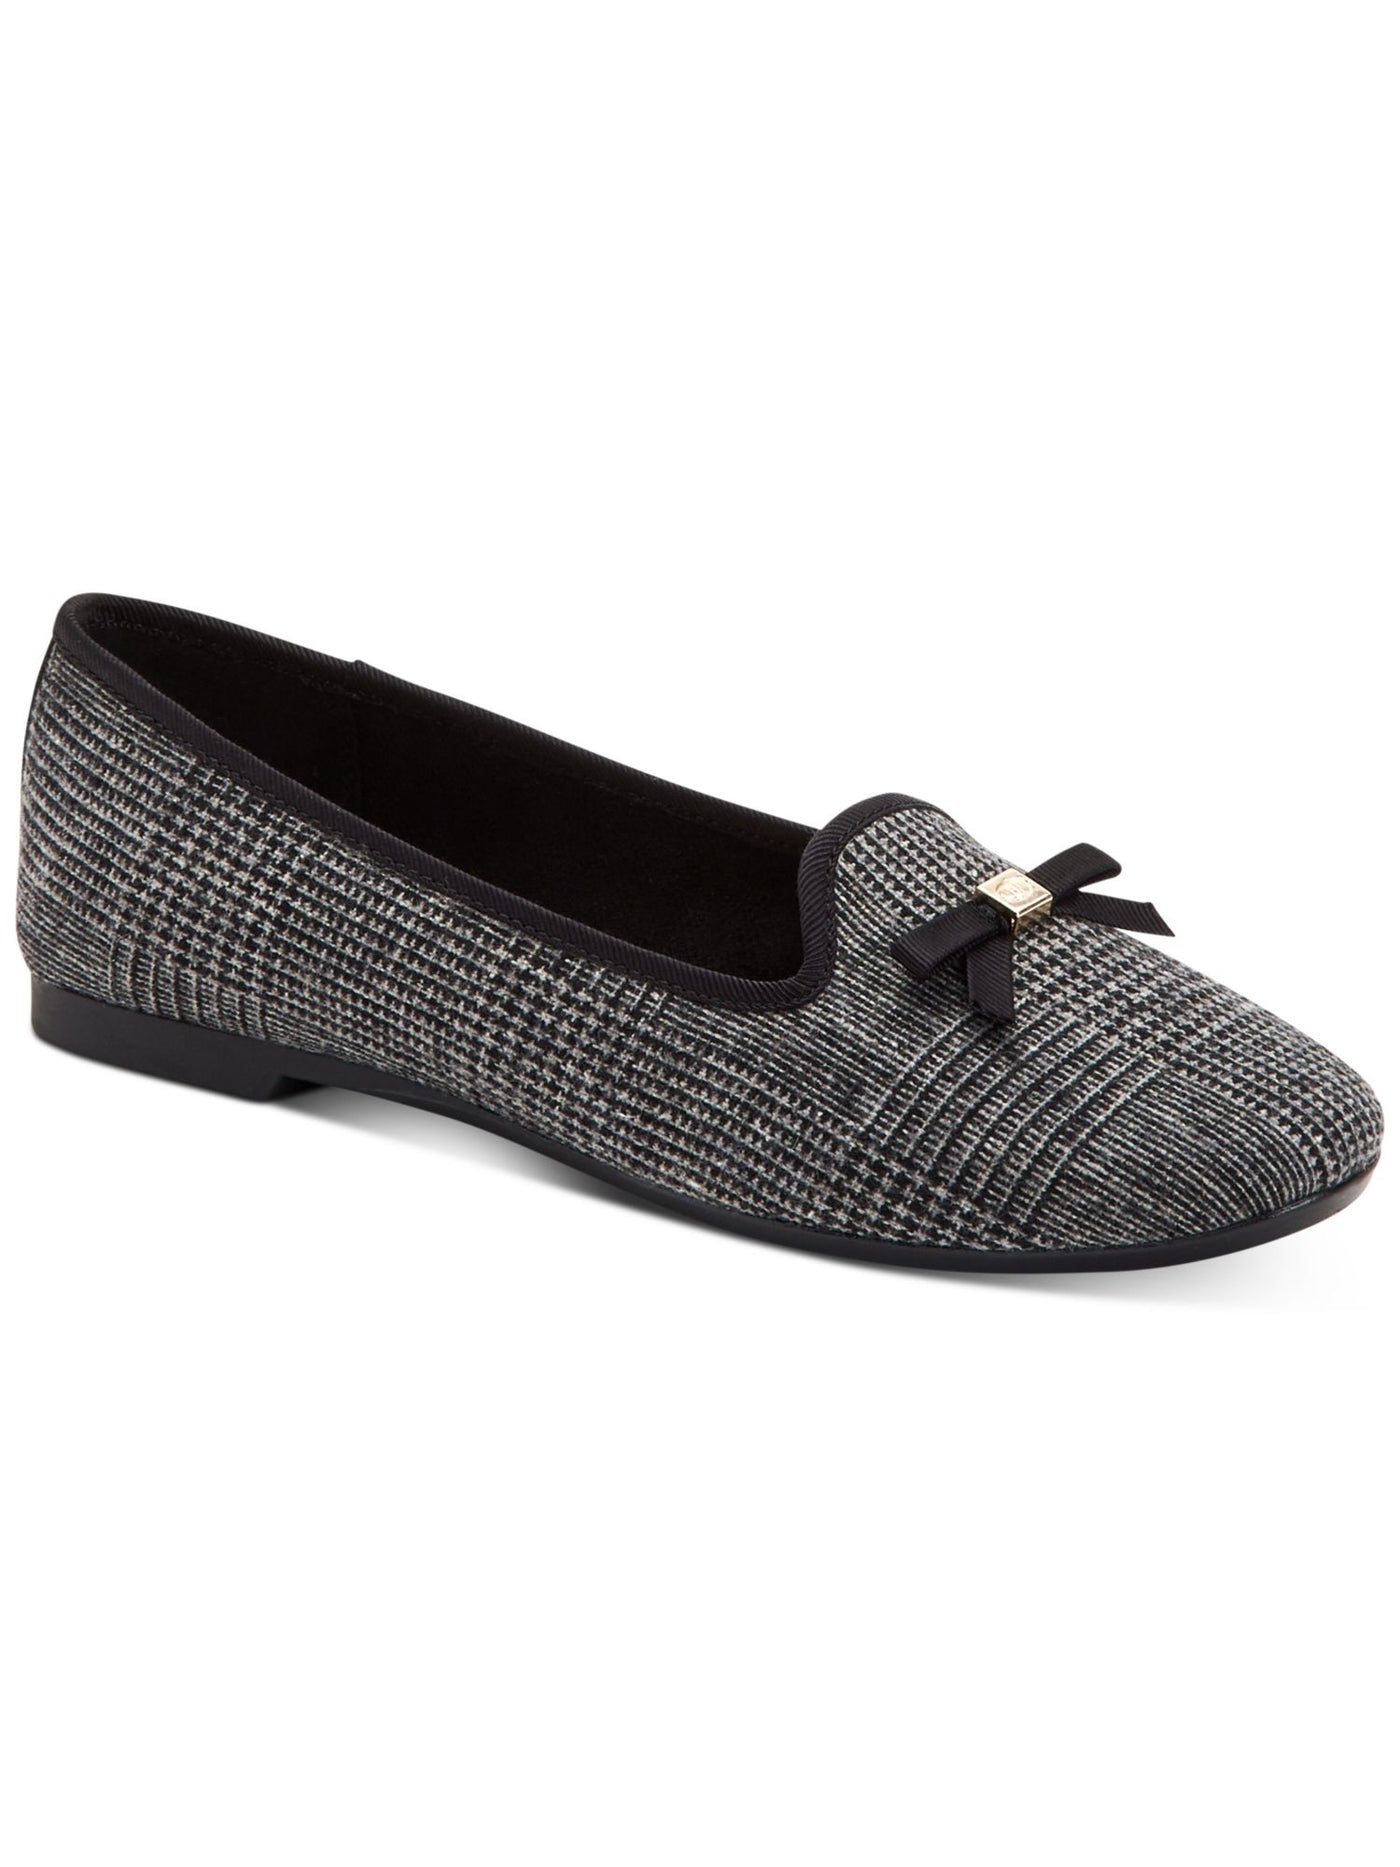 CHARTER CLUB Womens Gray Patterned Metallic Accent Bow Accent Padded Kimii Round Toe Slip On Loafers Shoes 10.5 M